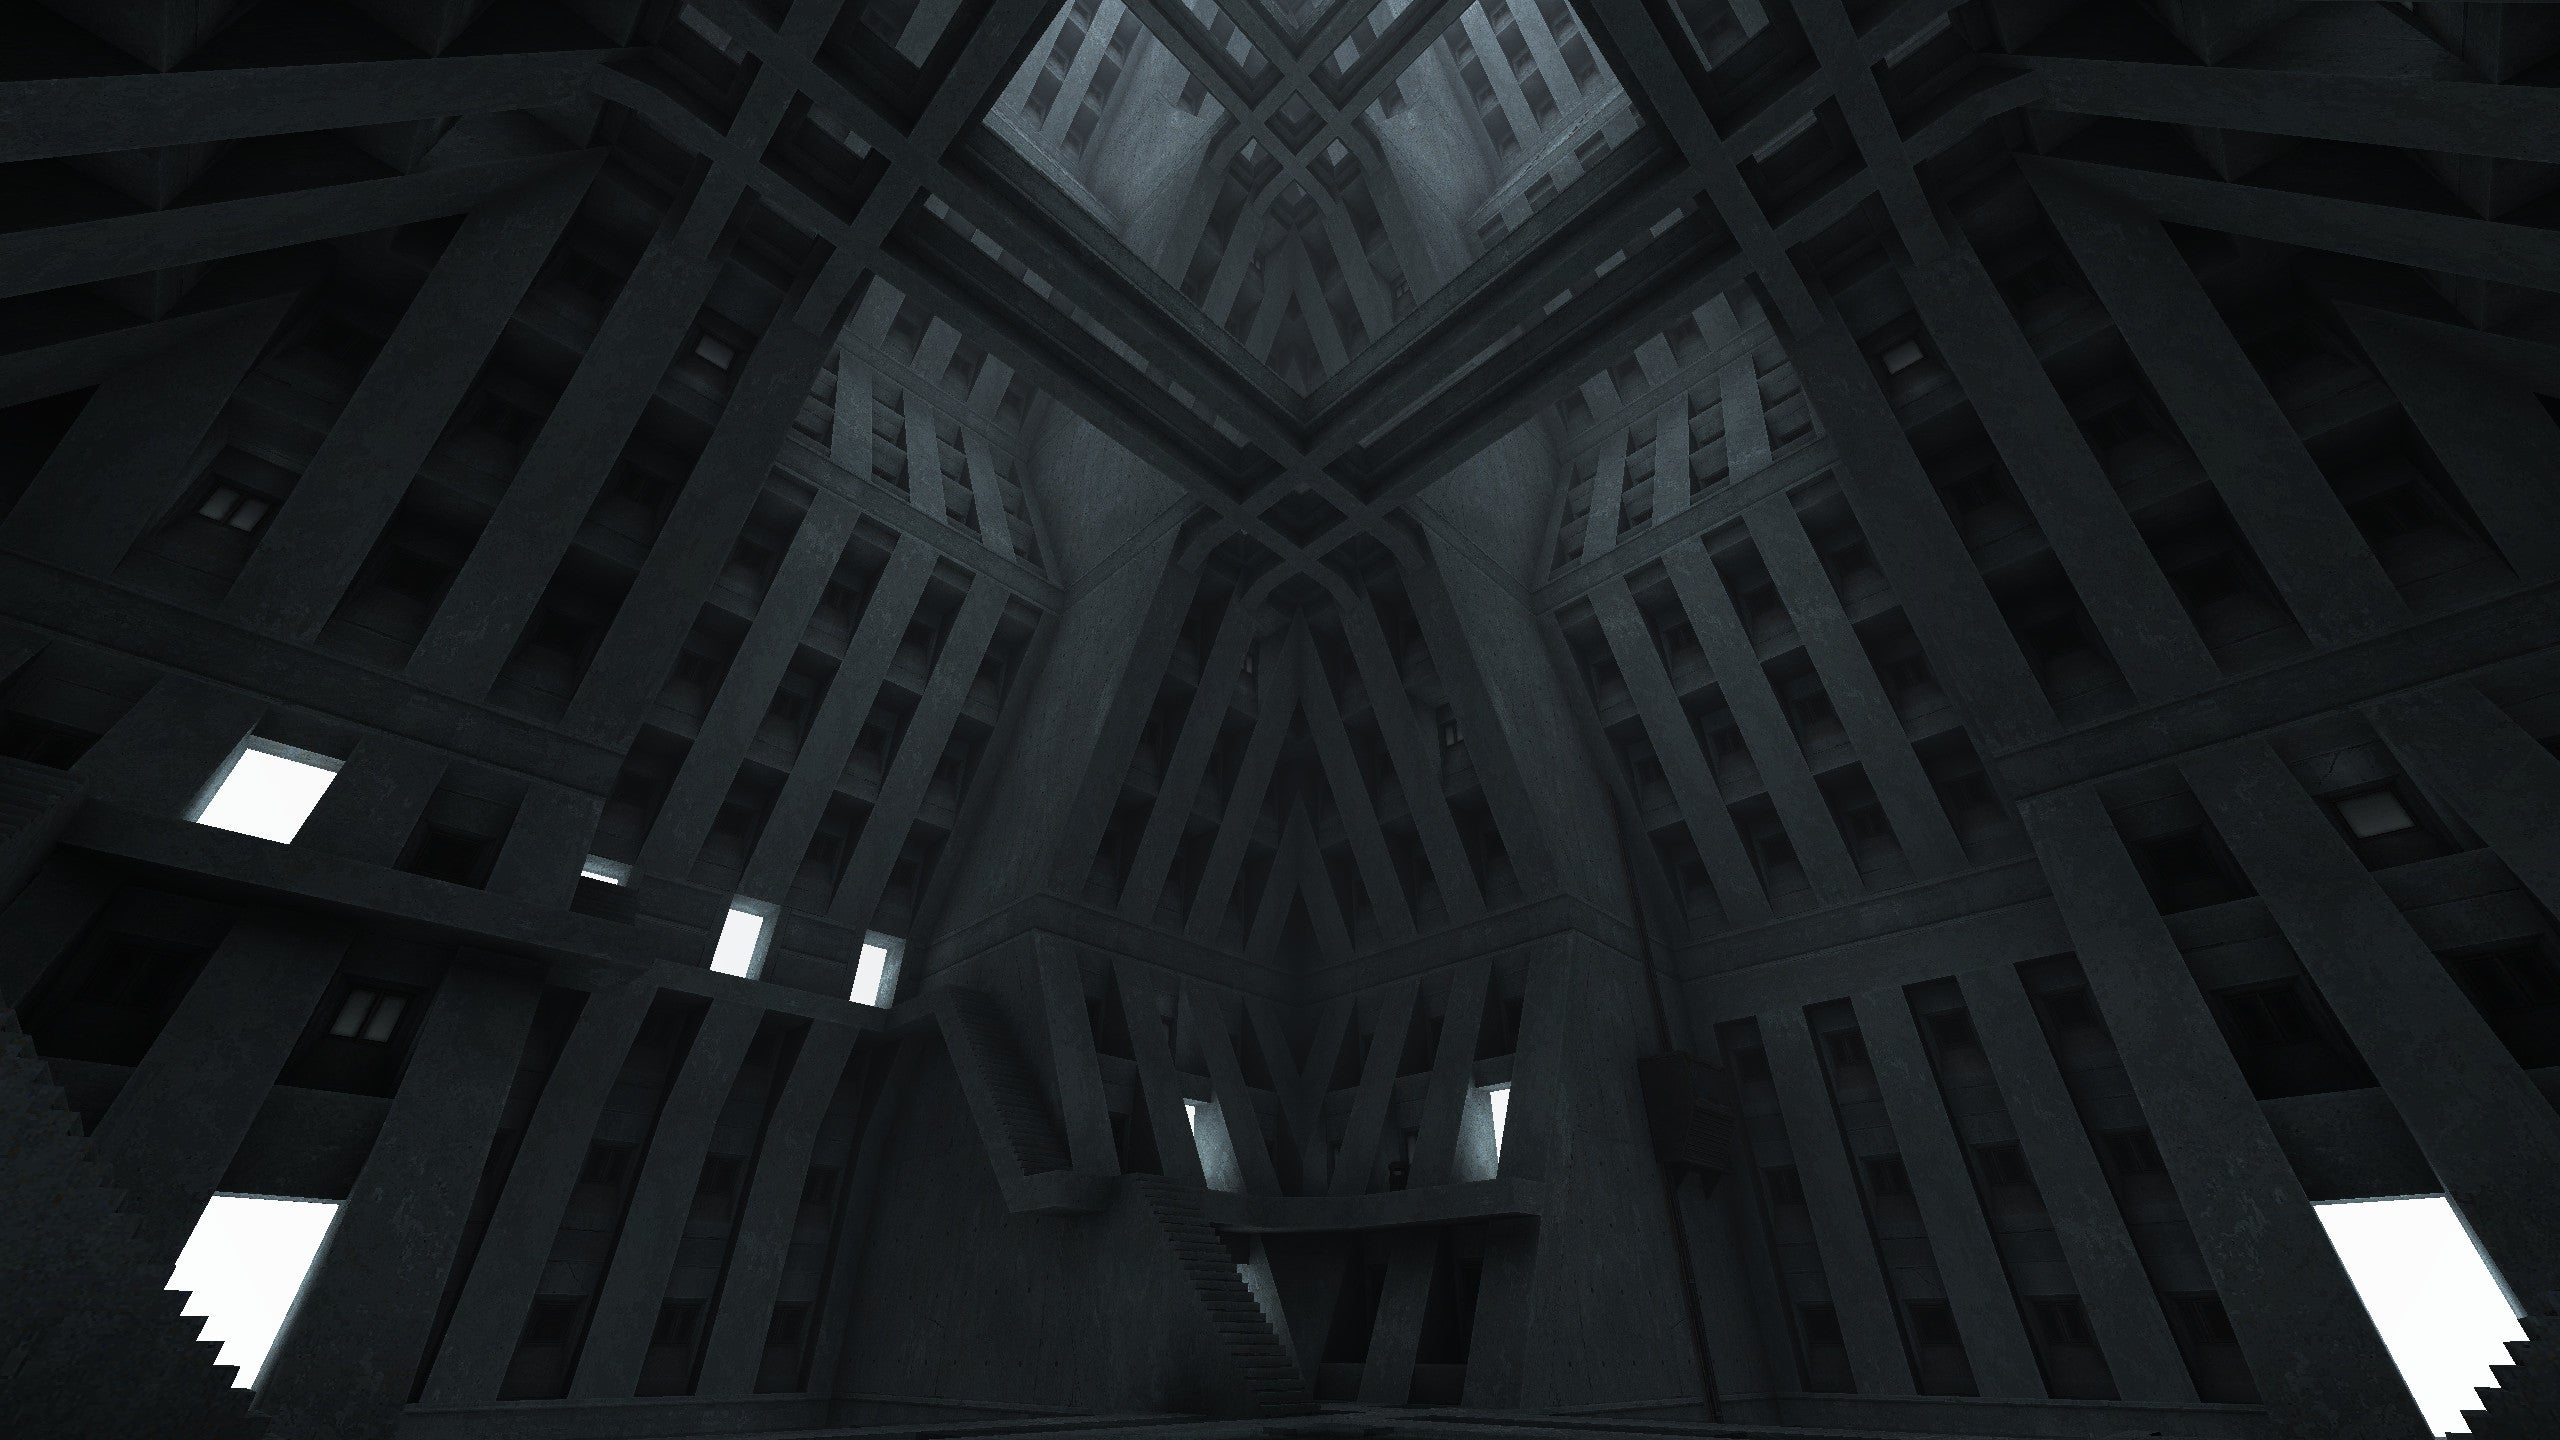 An otherworldly concrete space in the Quake Brutalist Jam map pack.